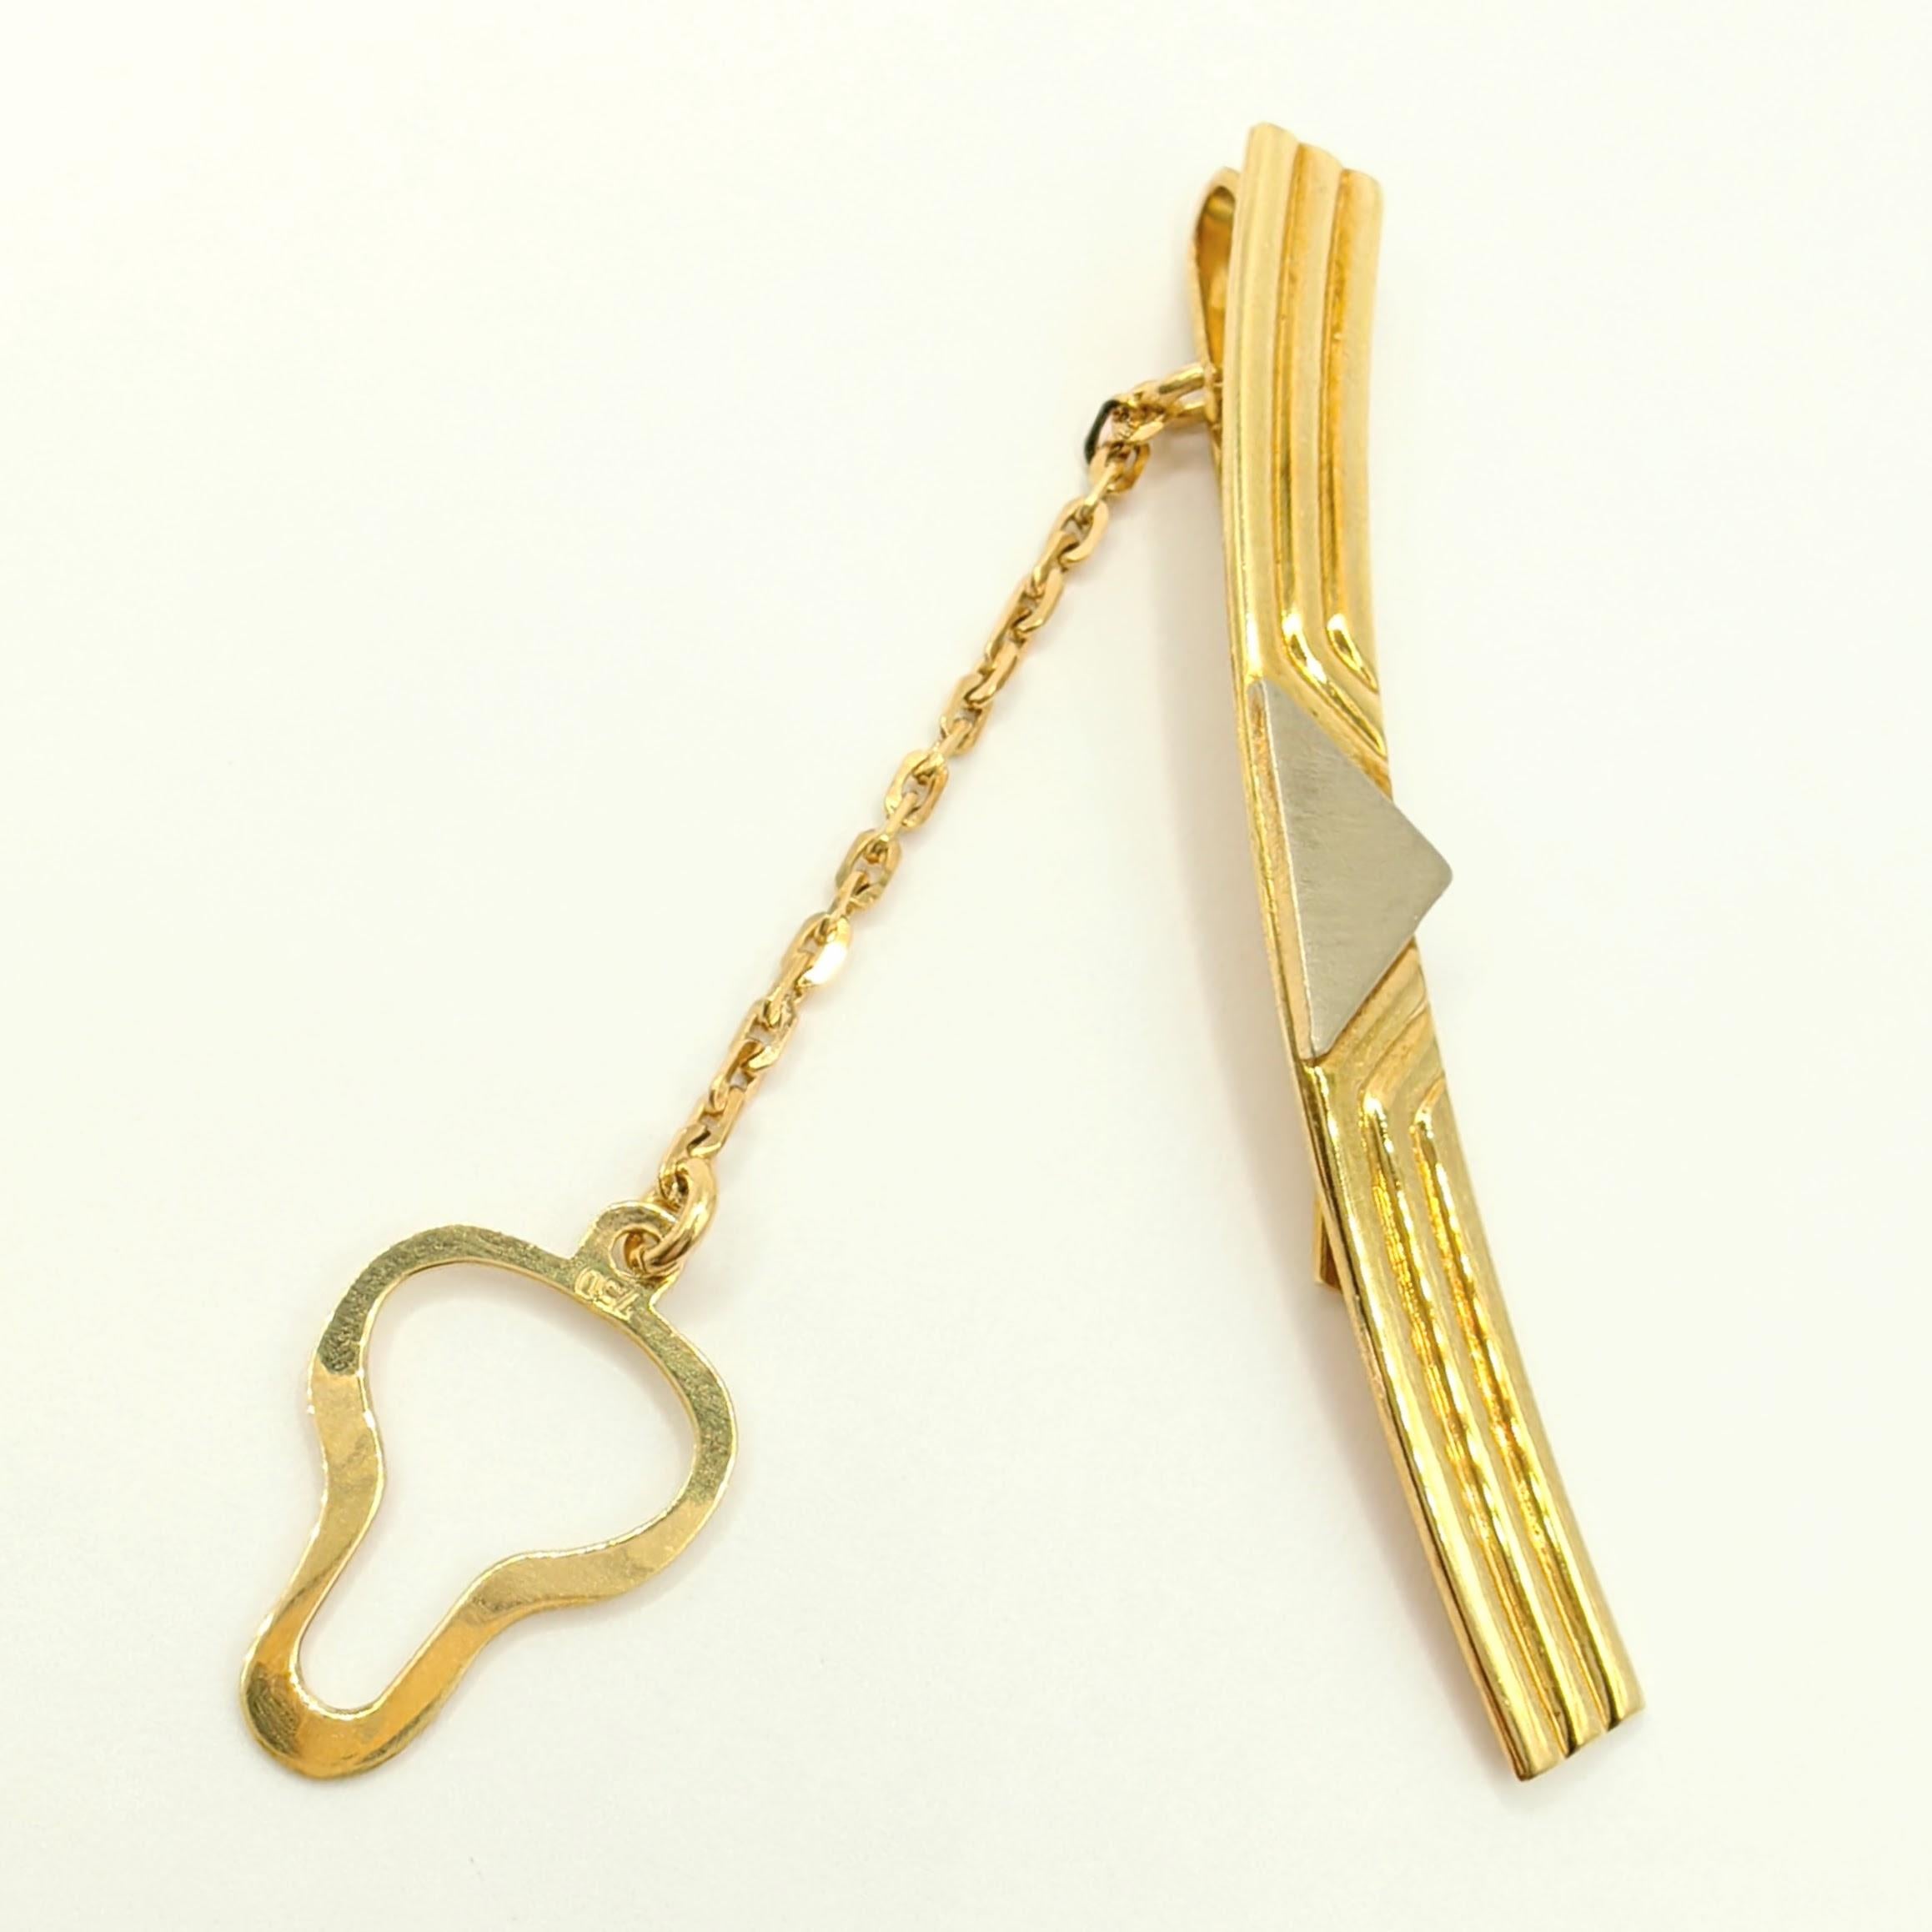 Vintage Fan Shape Tie Clip With Chain in 18K Yellow & White Two-tone Gold For Sale 2